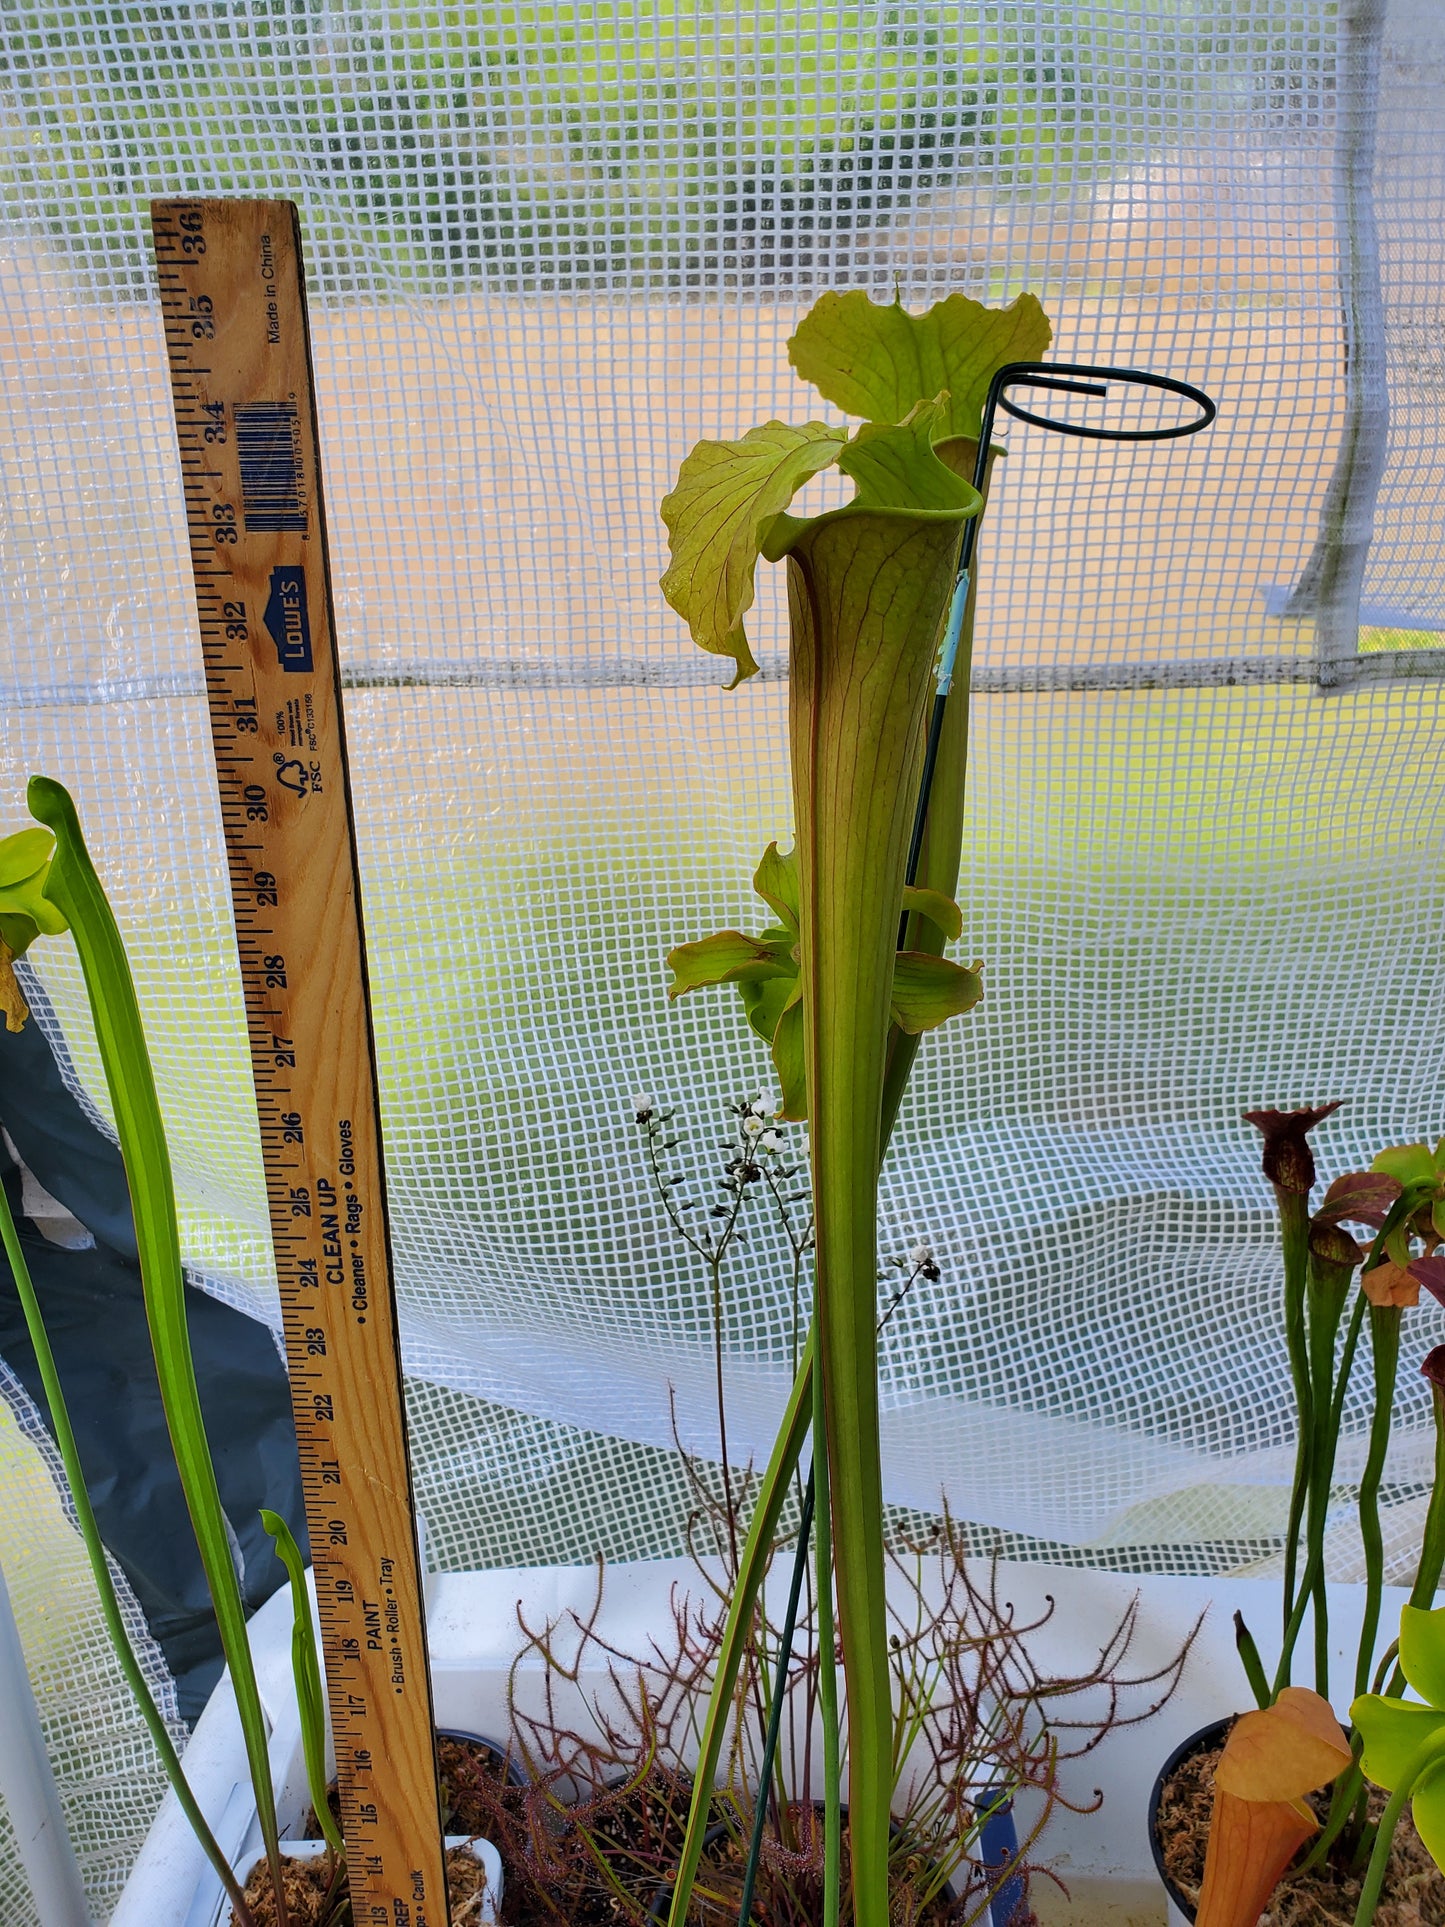 Pitcher Plant - Sarracenia "Mad Green Thing" Carnivorous Live plant